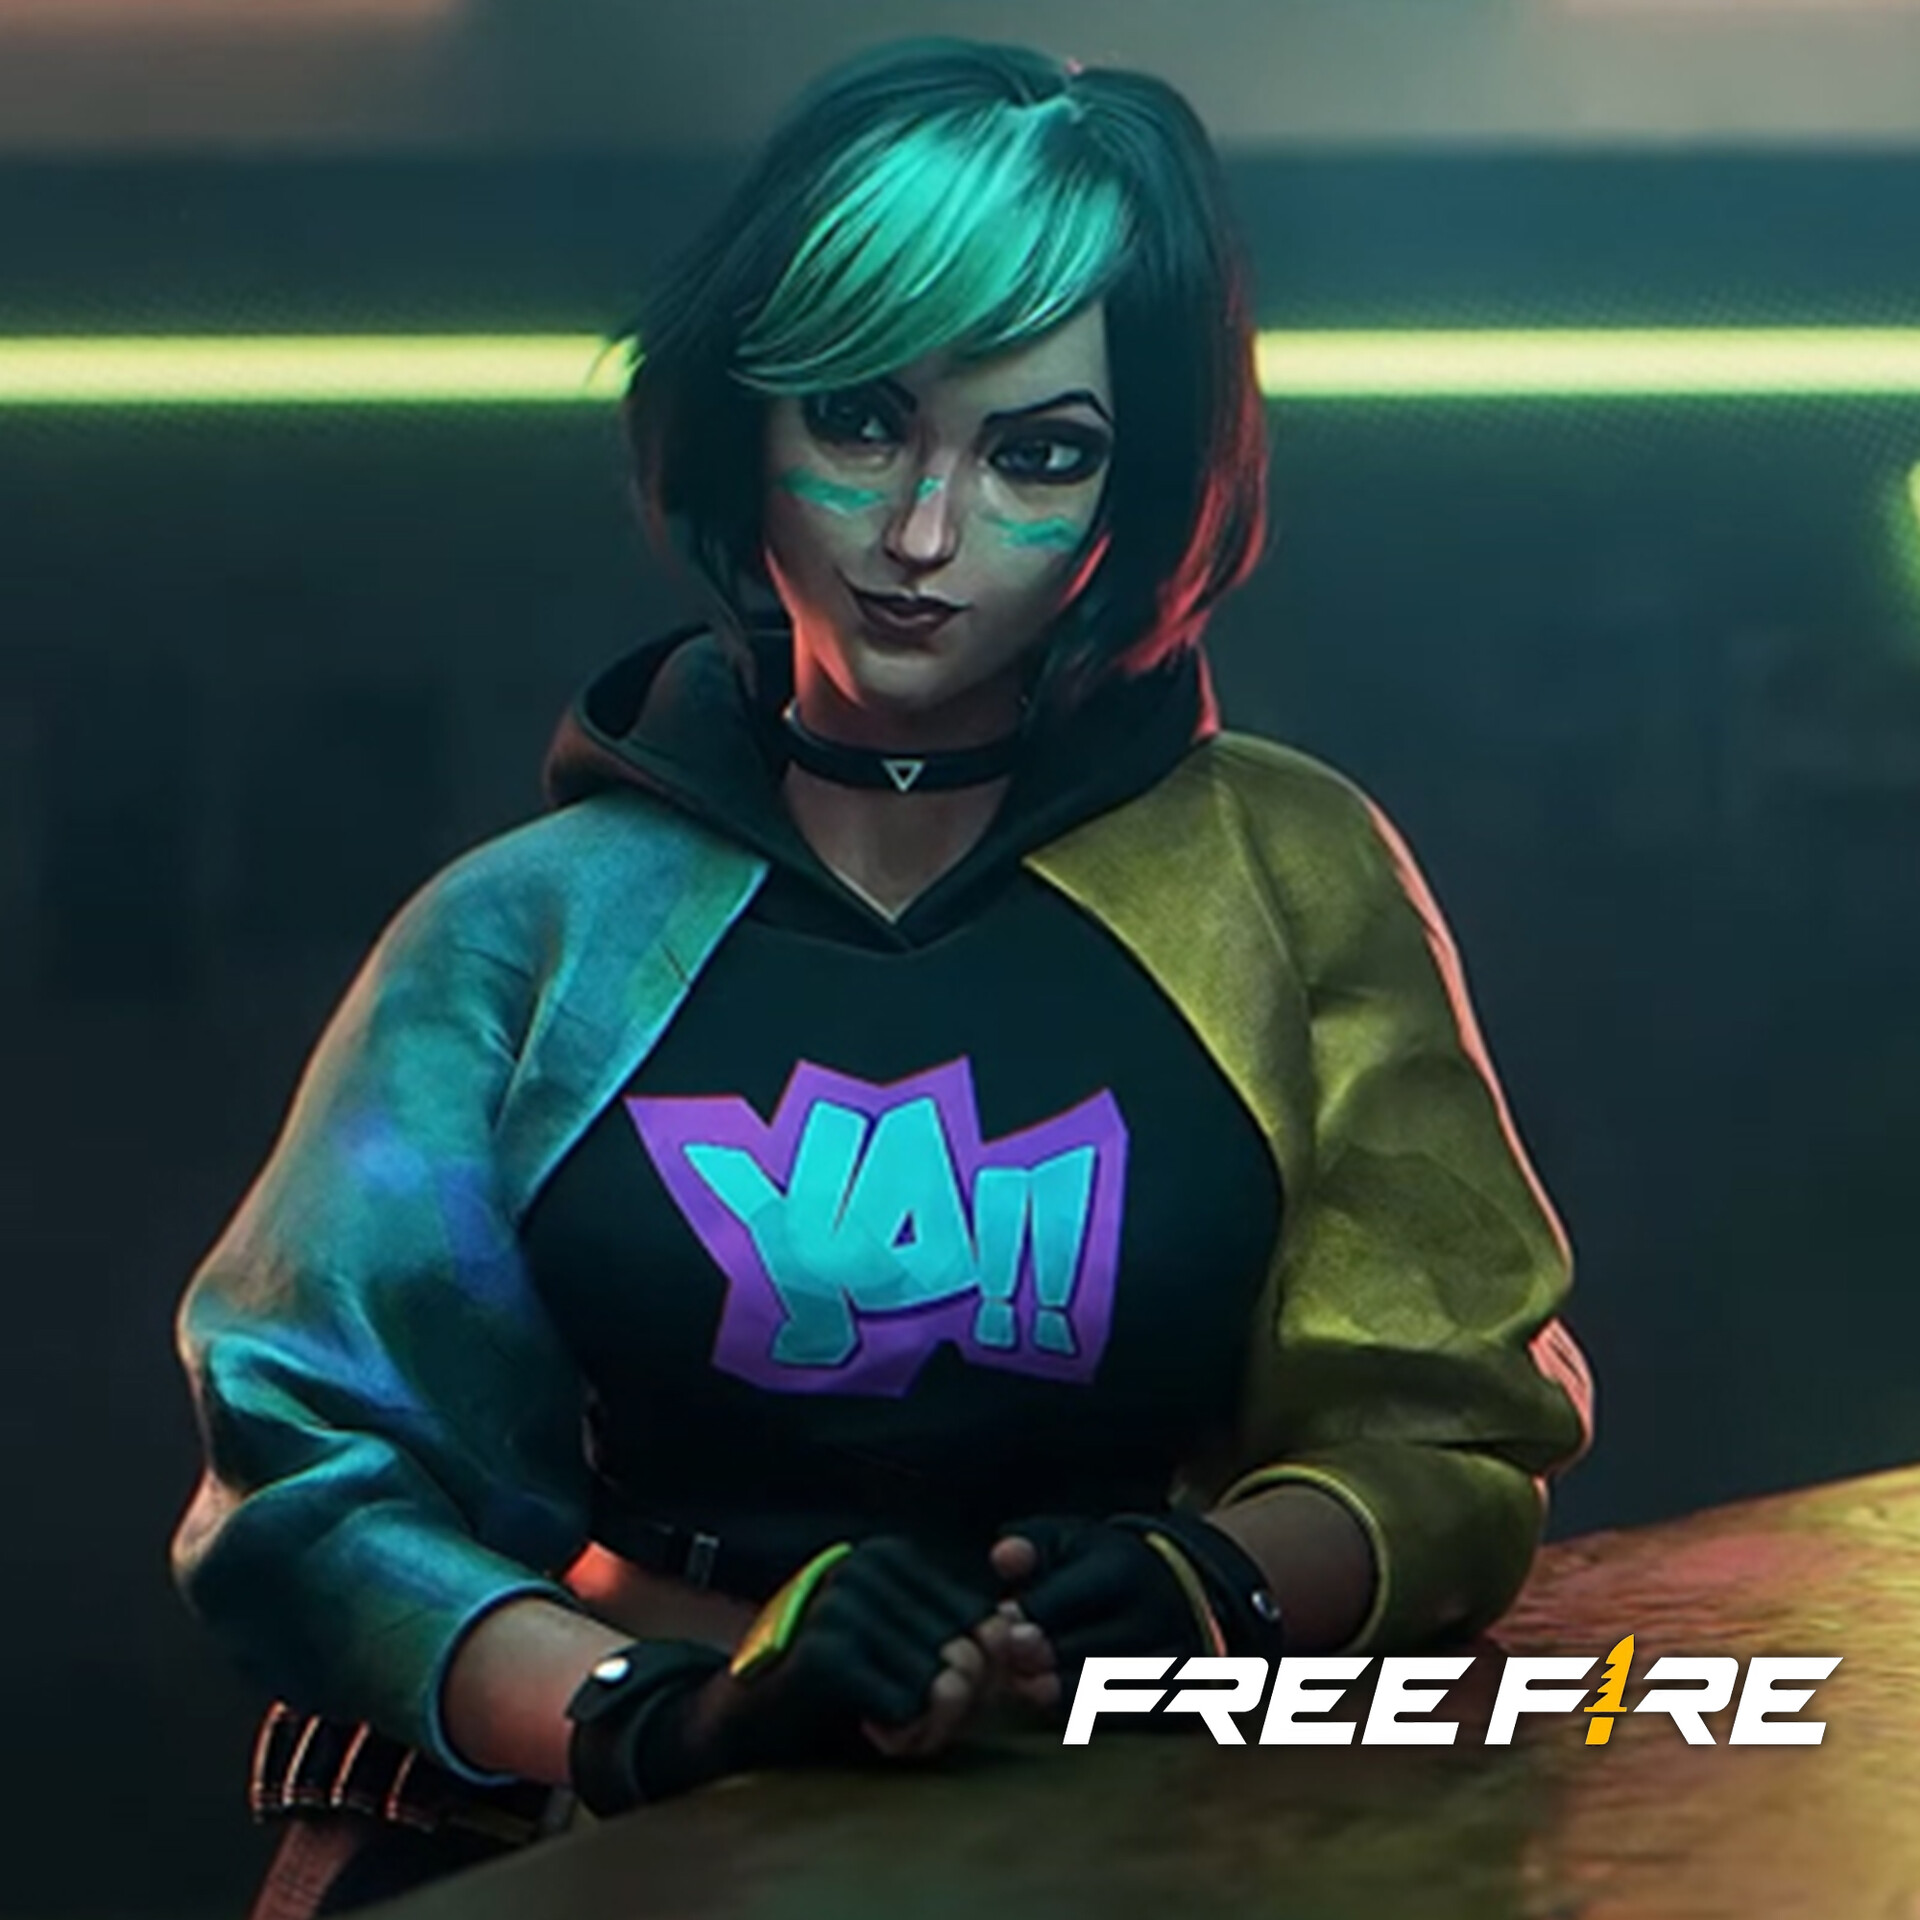 ORION - FREEFIRE RENDER PNG by WOLVESDZN on DeviantArt